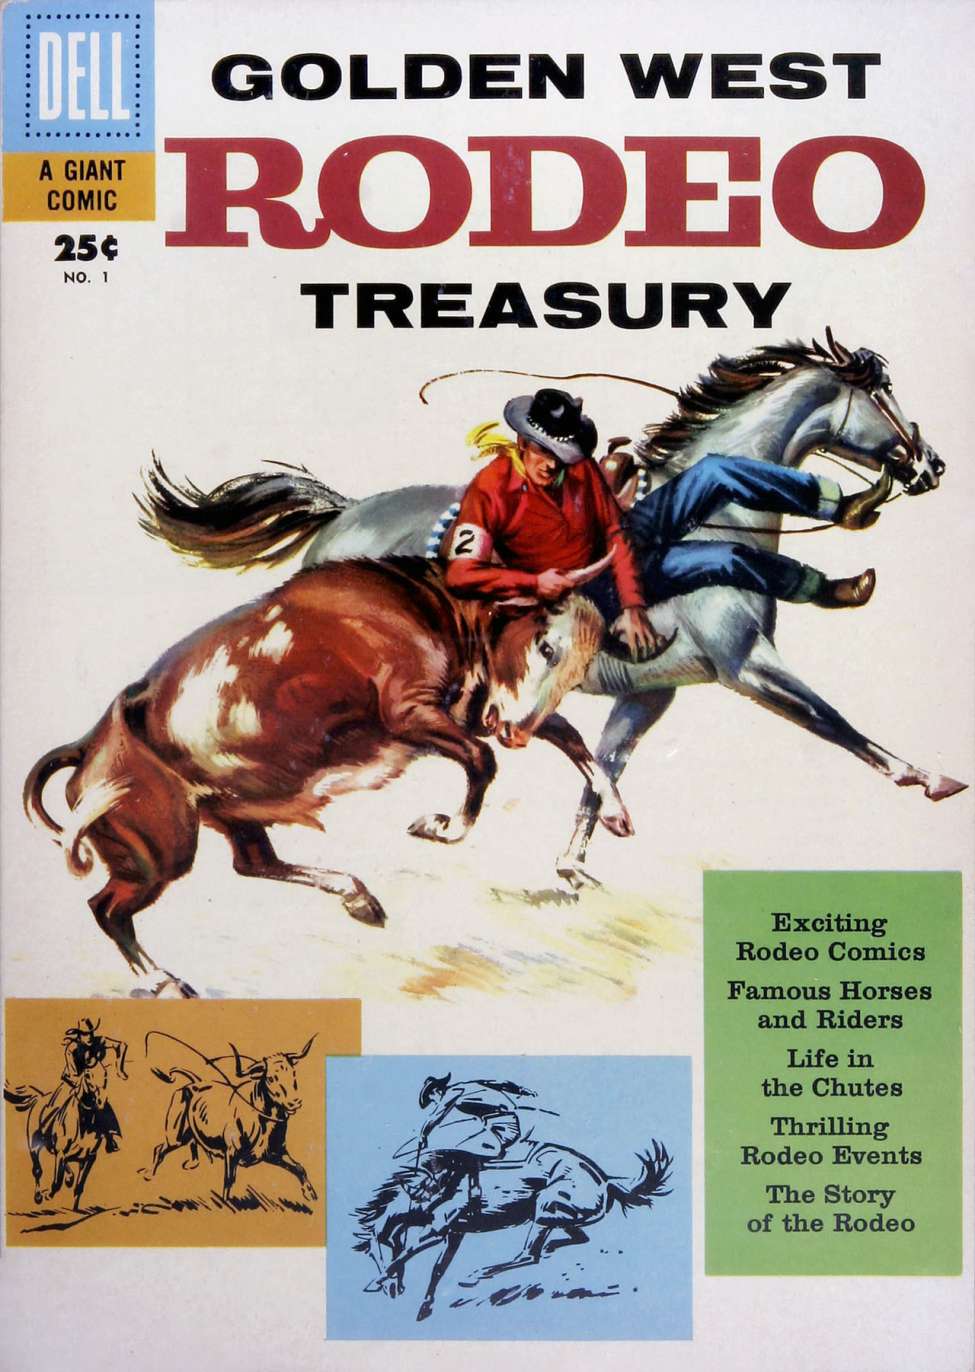 Book Cover For Golden West Rodeo Treasury 1